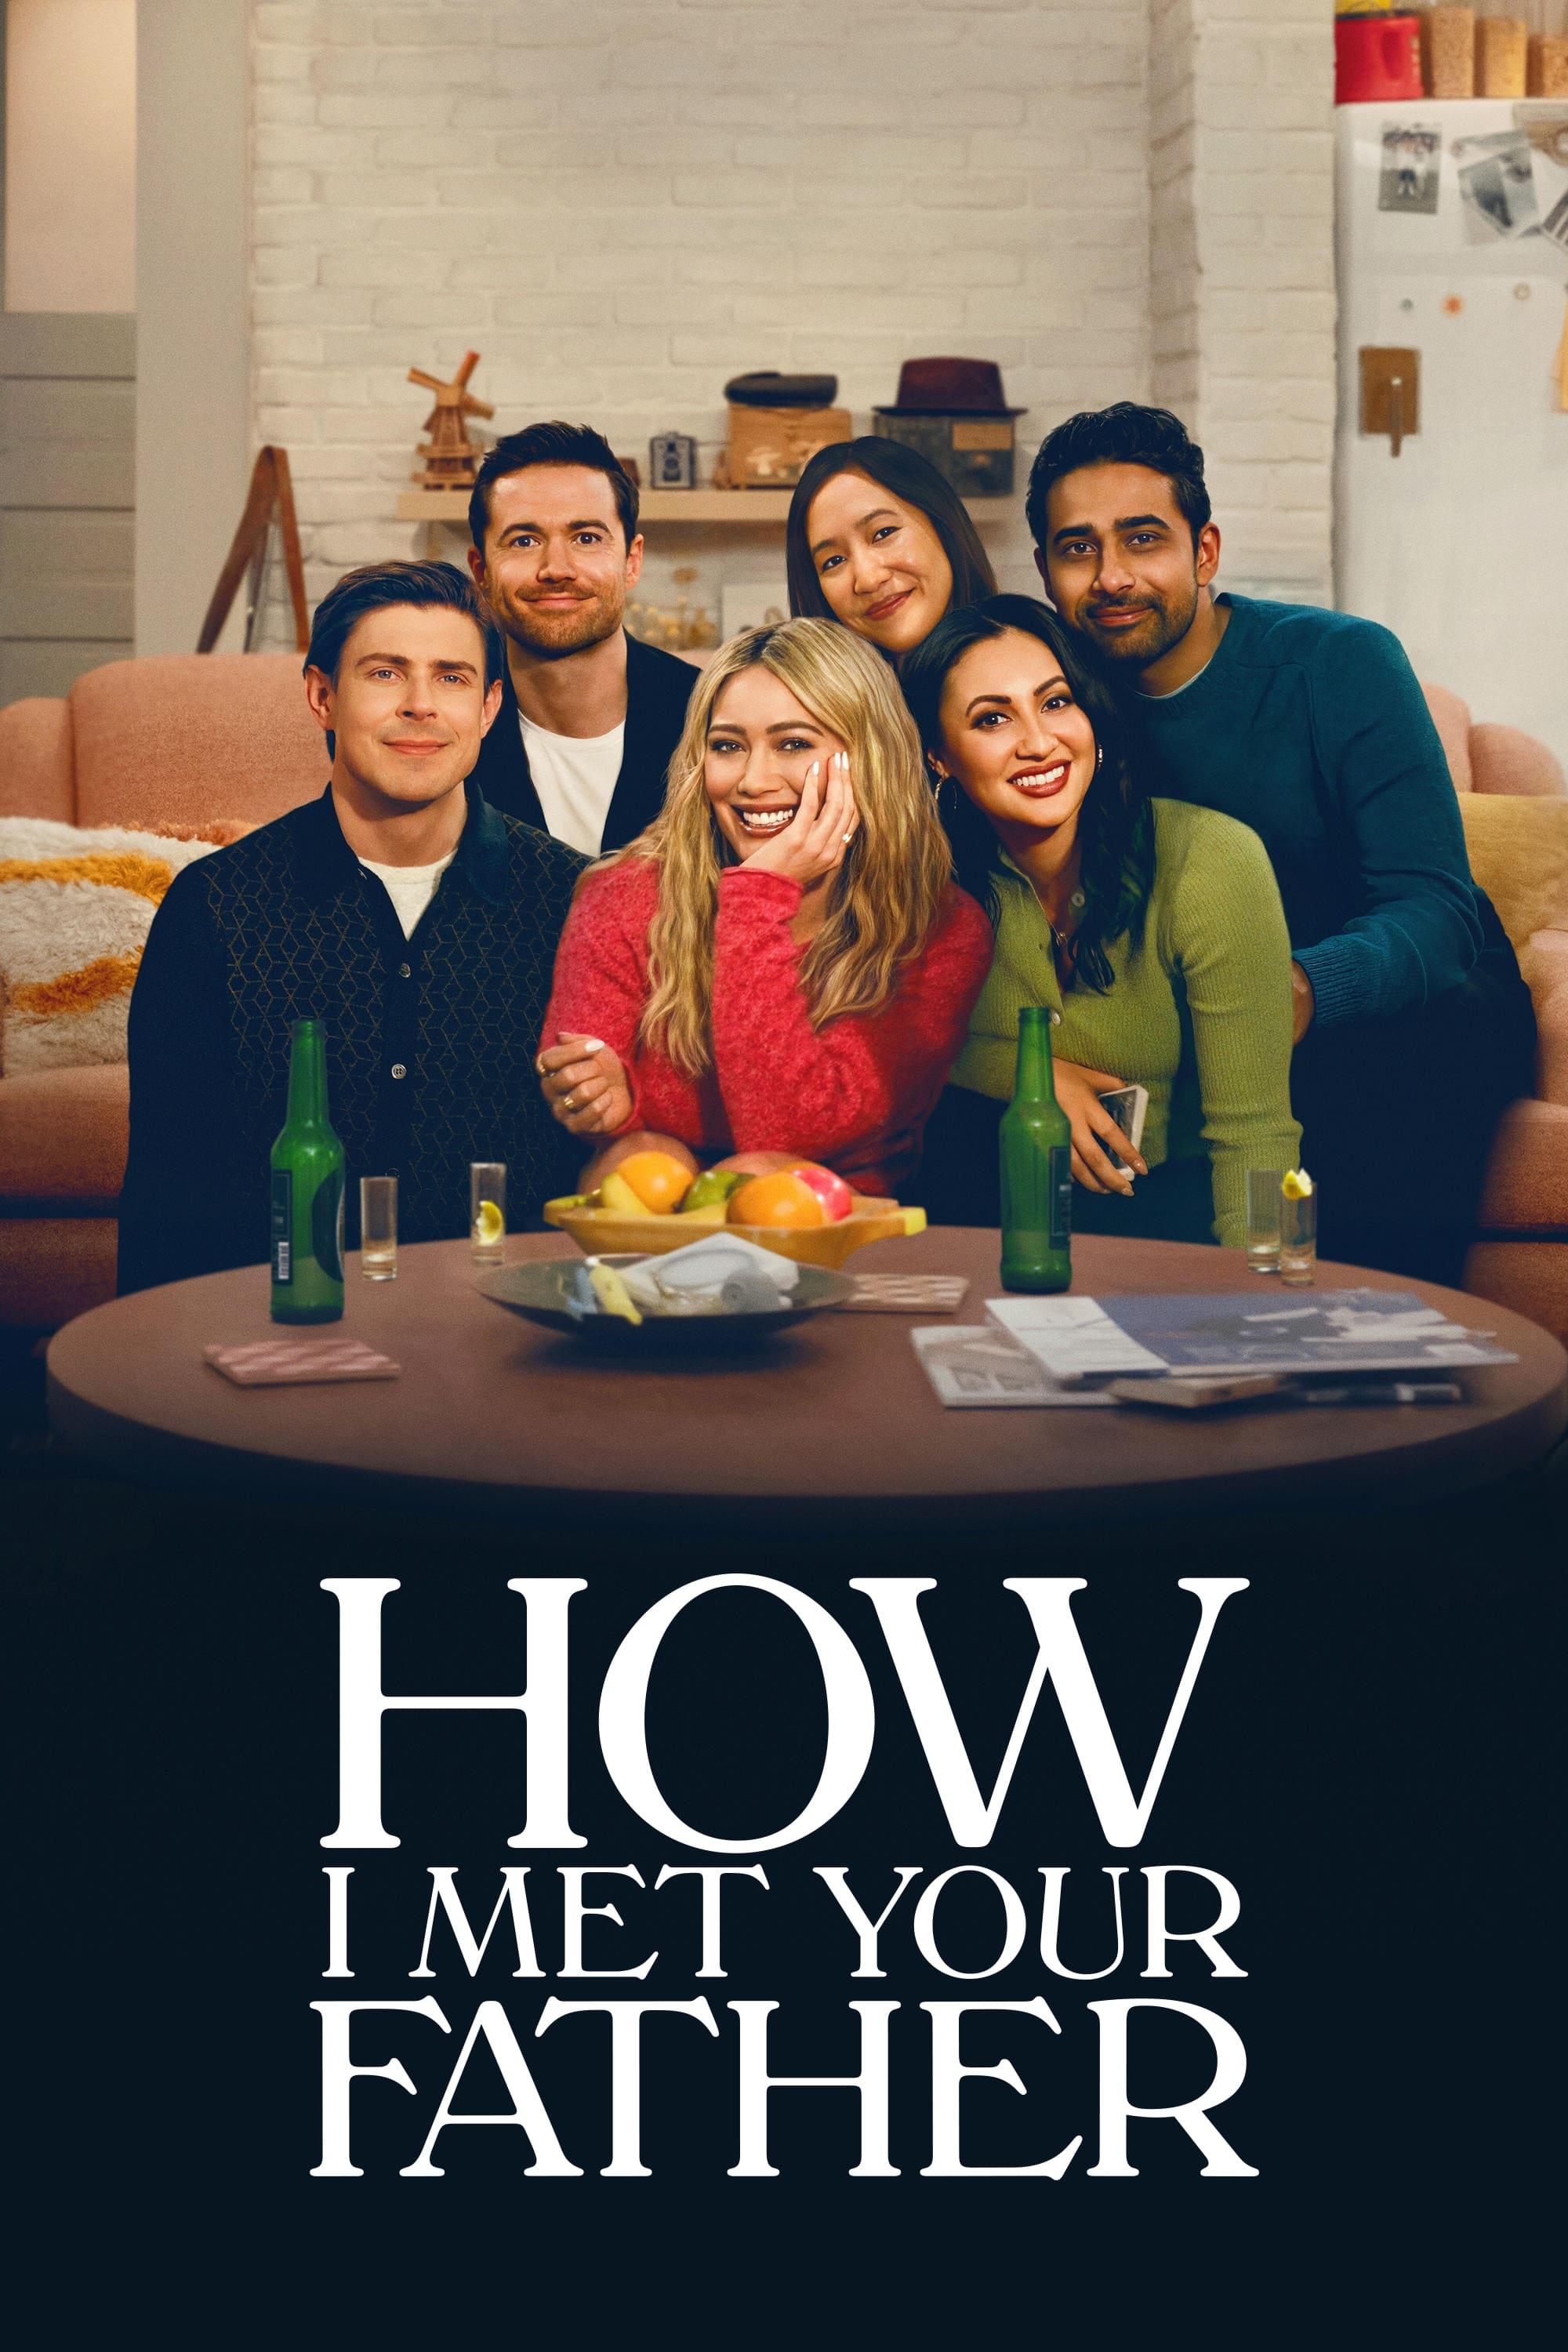 How I Met Your Father poster